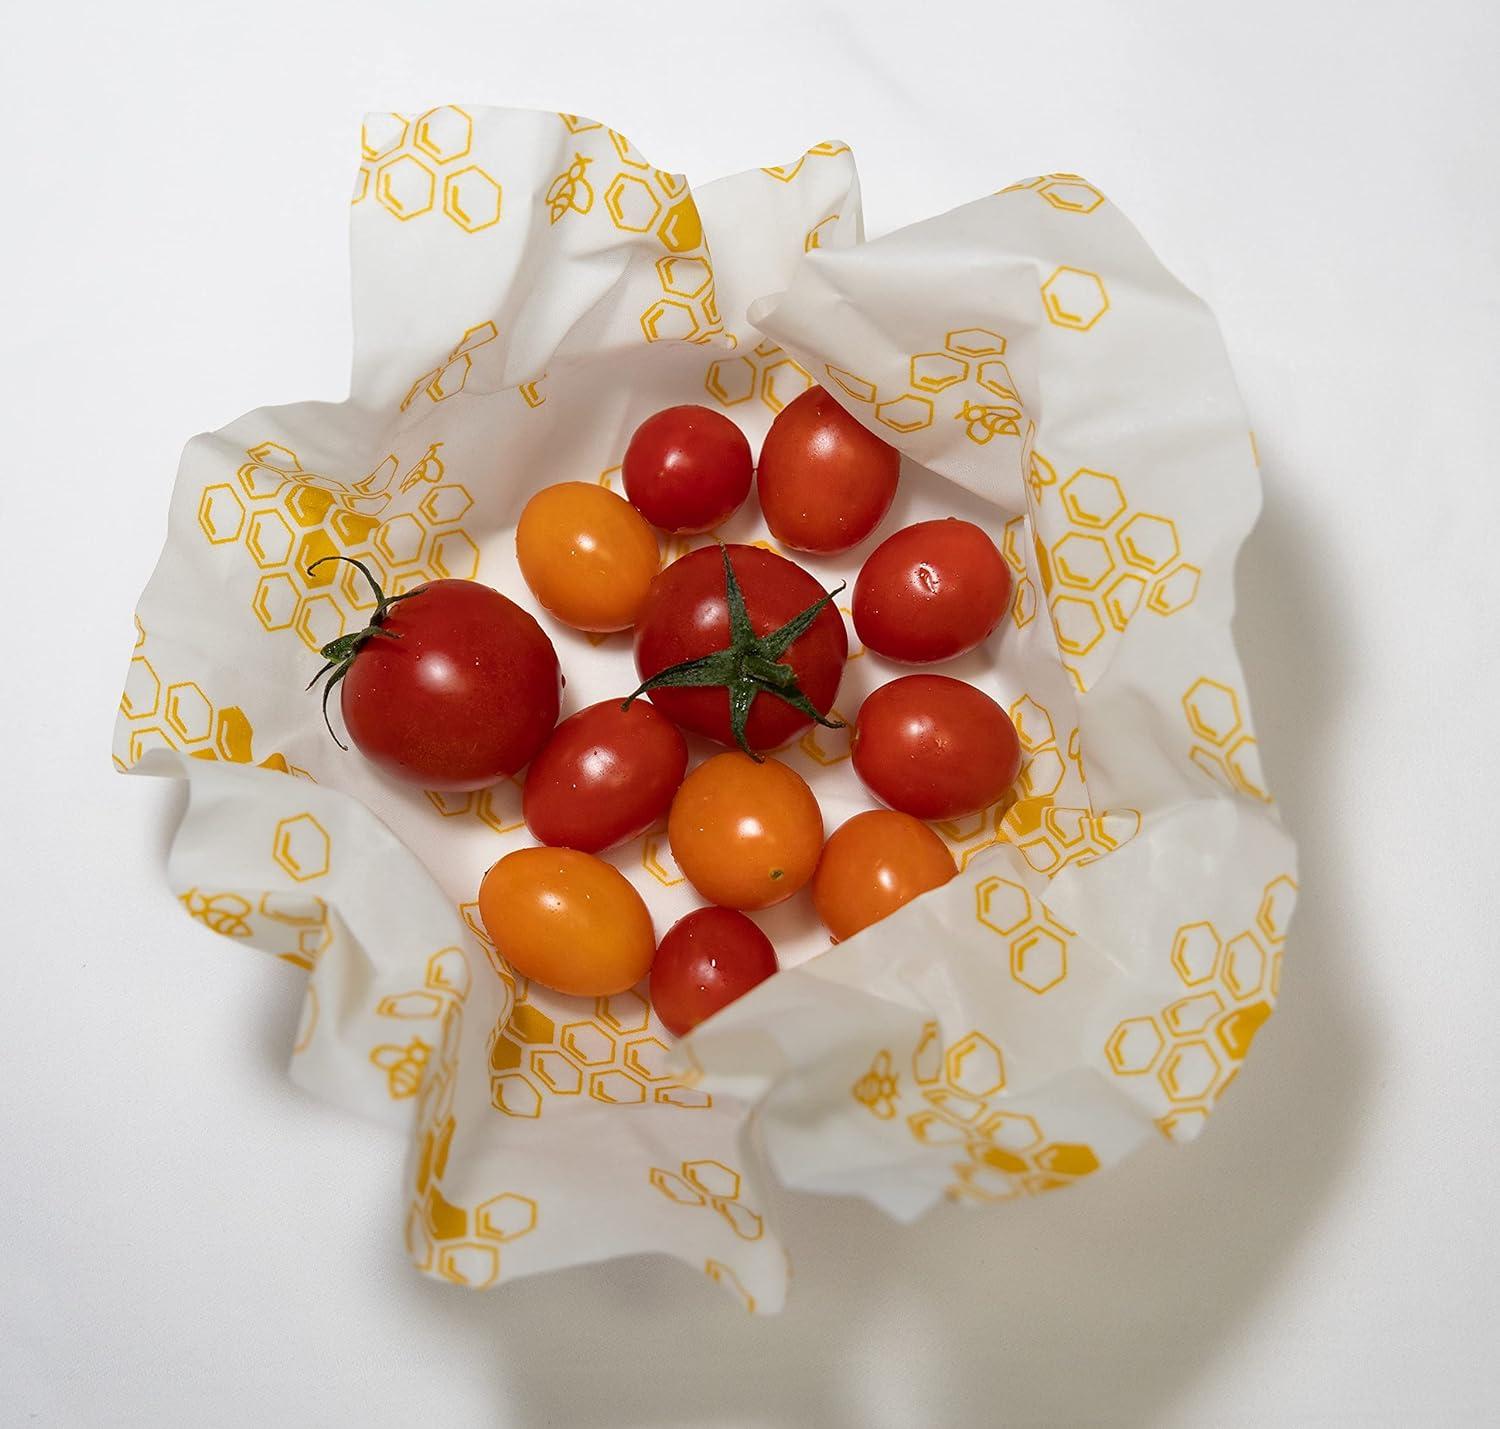 Reusable Beeswax Food Wrap - 3-Pack - Biodegradable Sustainable